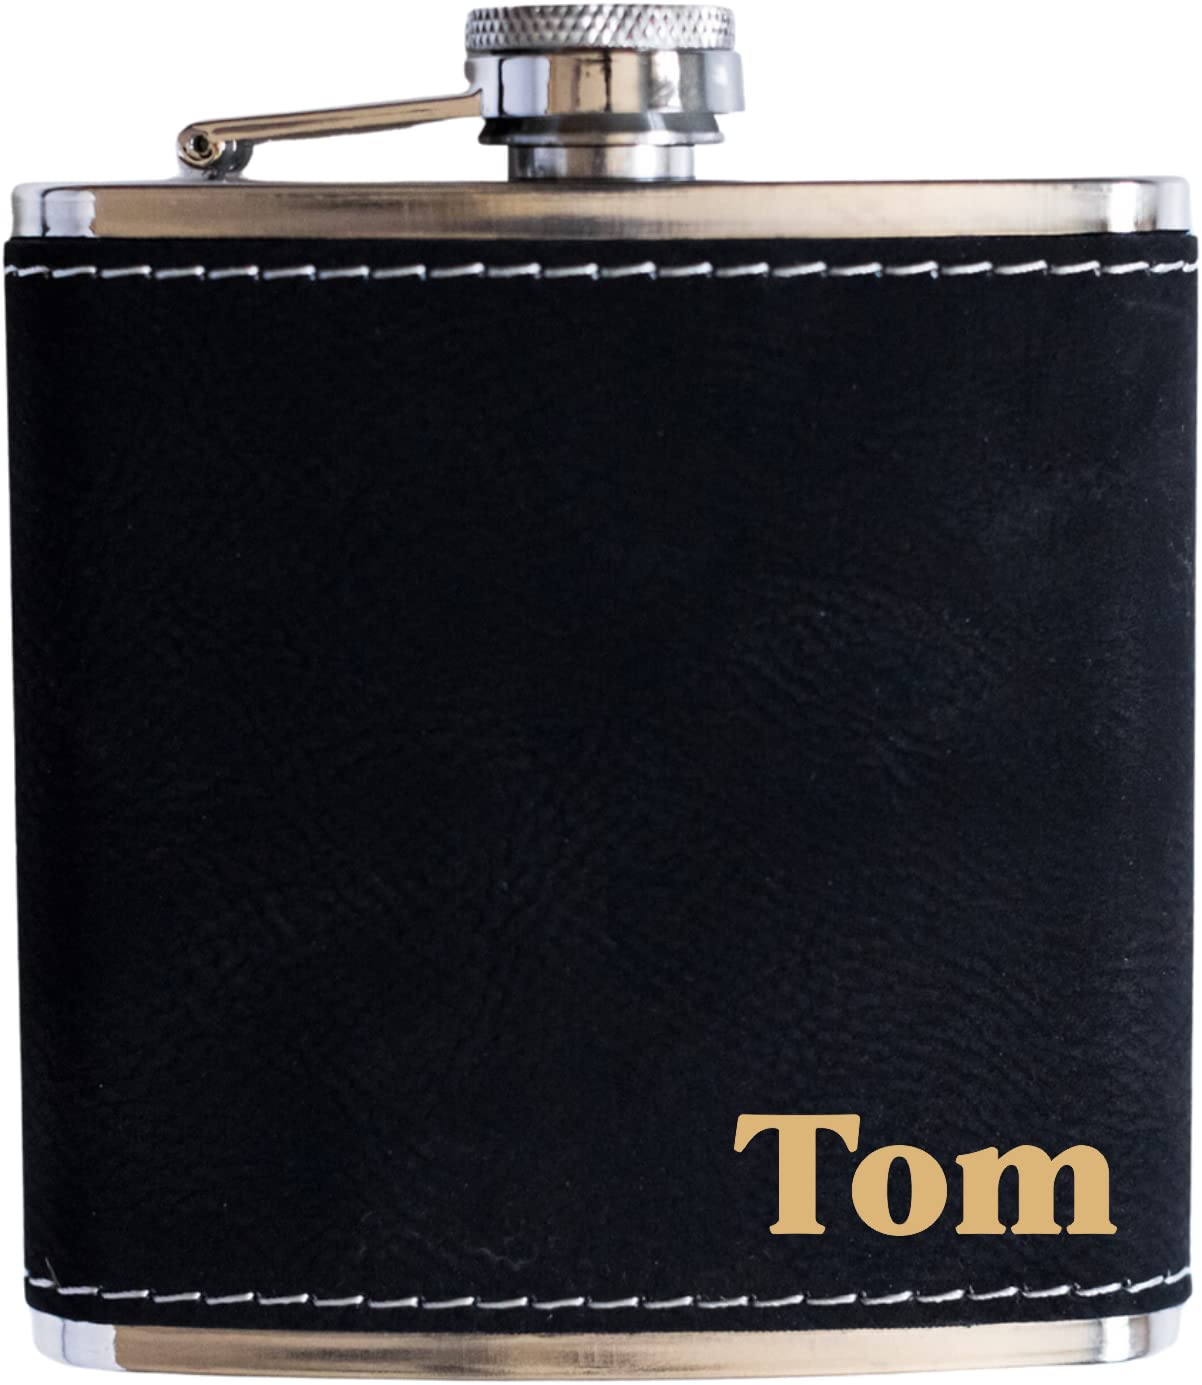 Personalized Flask For Wedding Gift. Customized Flask Gift Set. Engraved Leatherette Flask With Optional Gift Box For Groomsmen Gifts. Engraved Flask (Black & Gold)